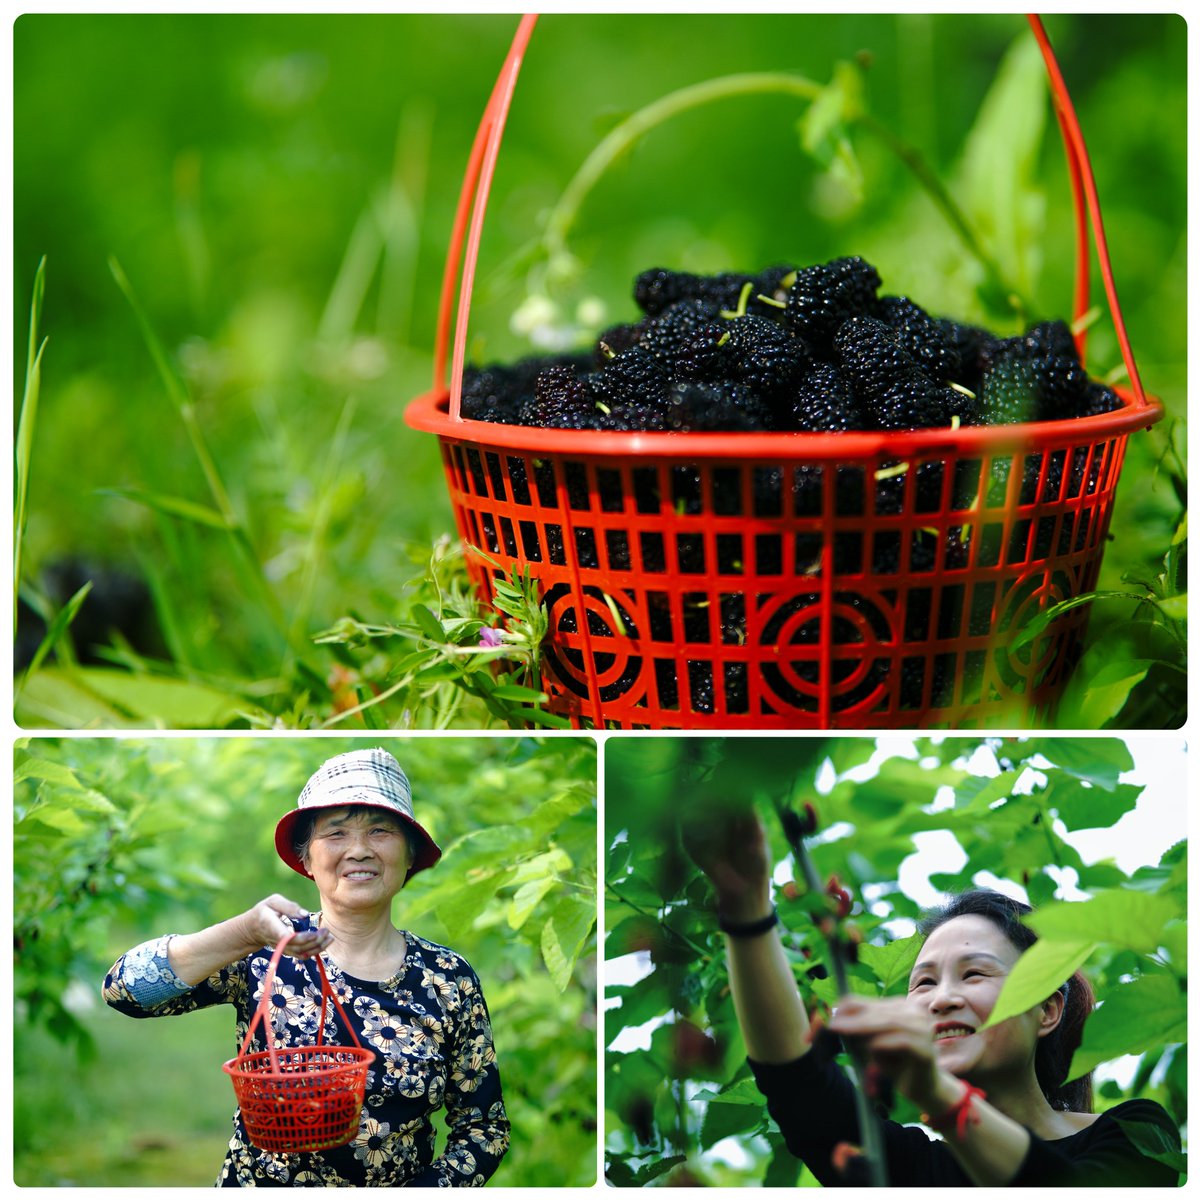 #Mulberry season has arrived🧑‍🌾! The #mulberries in #Yuhang 📍 have once again entered the anual #harvestseason! The smell of mulberries  in the air👃，luring us to explore the small purple and black treasure. Pick one your hand🫴 will be purple and black，take a sip and your